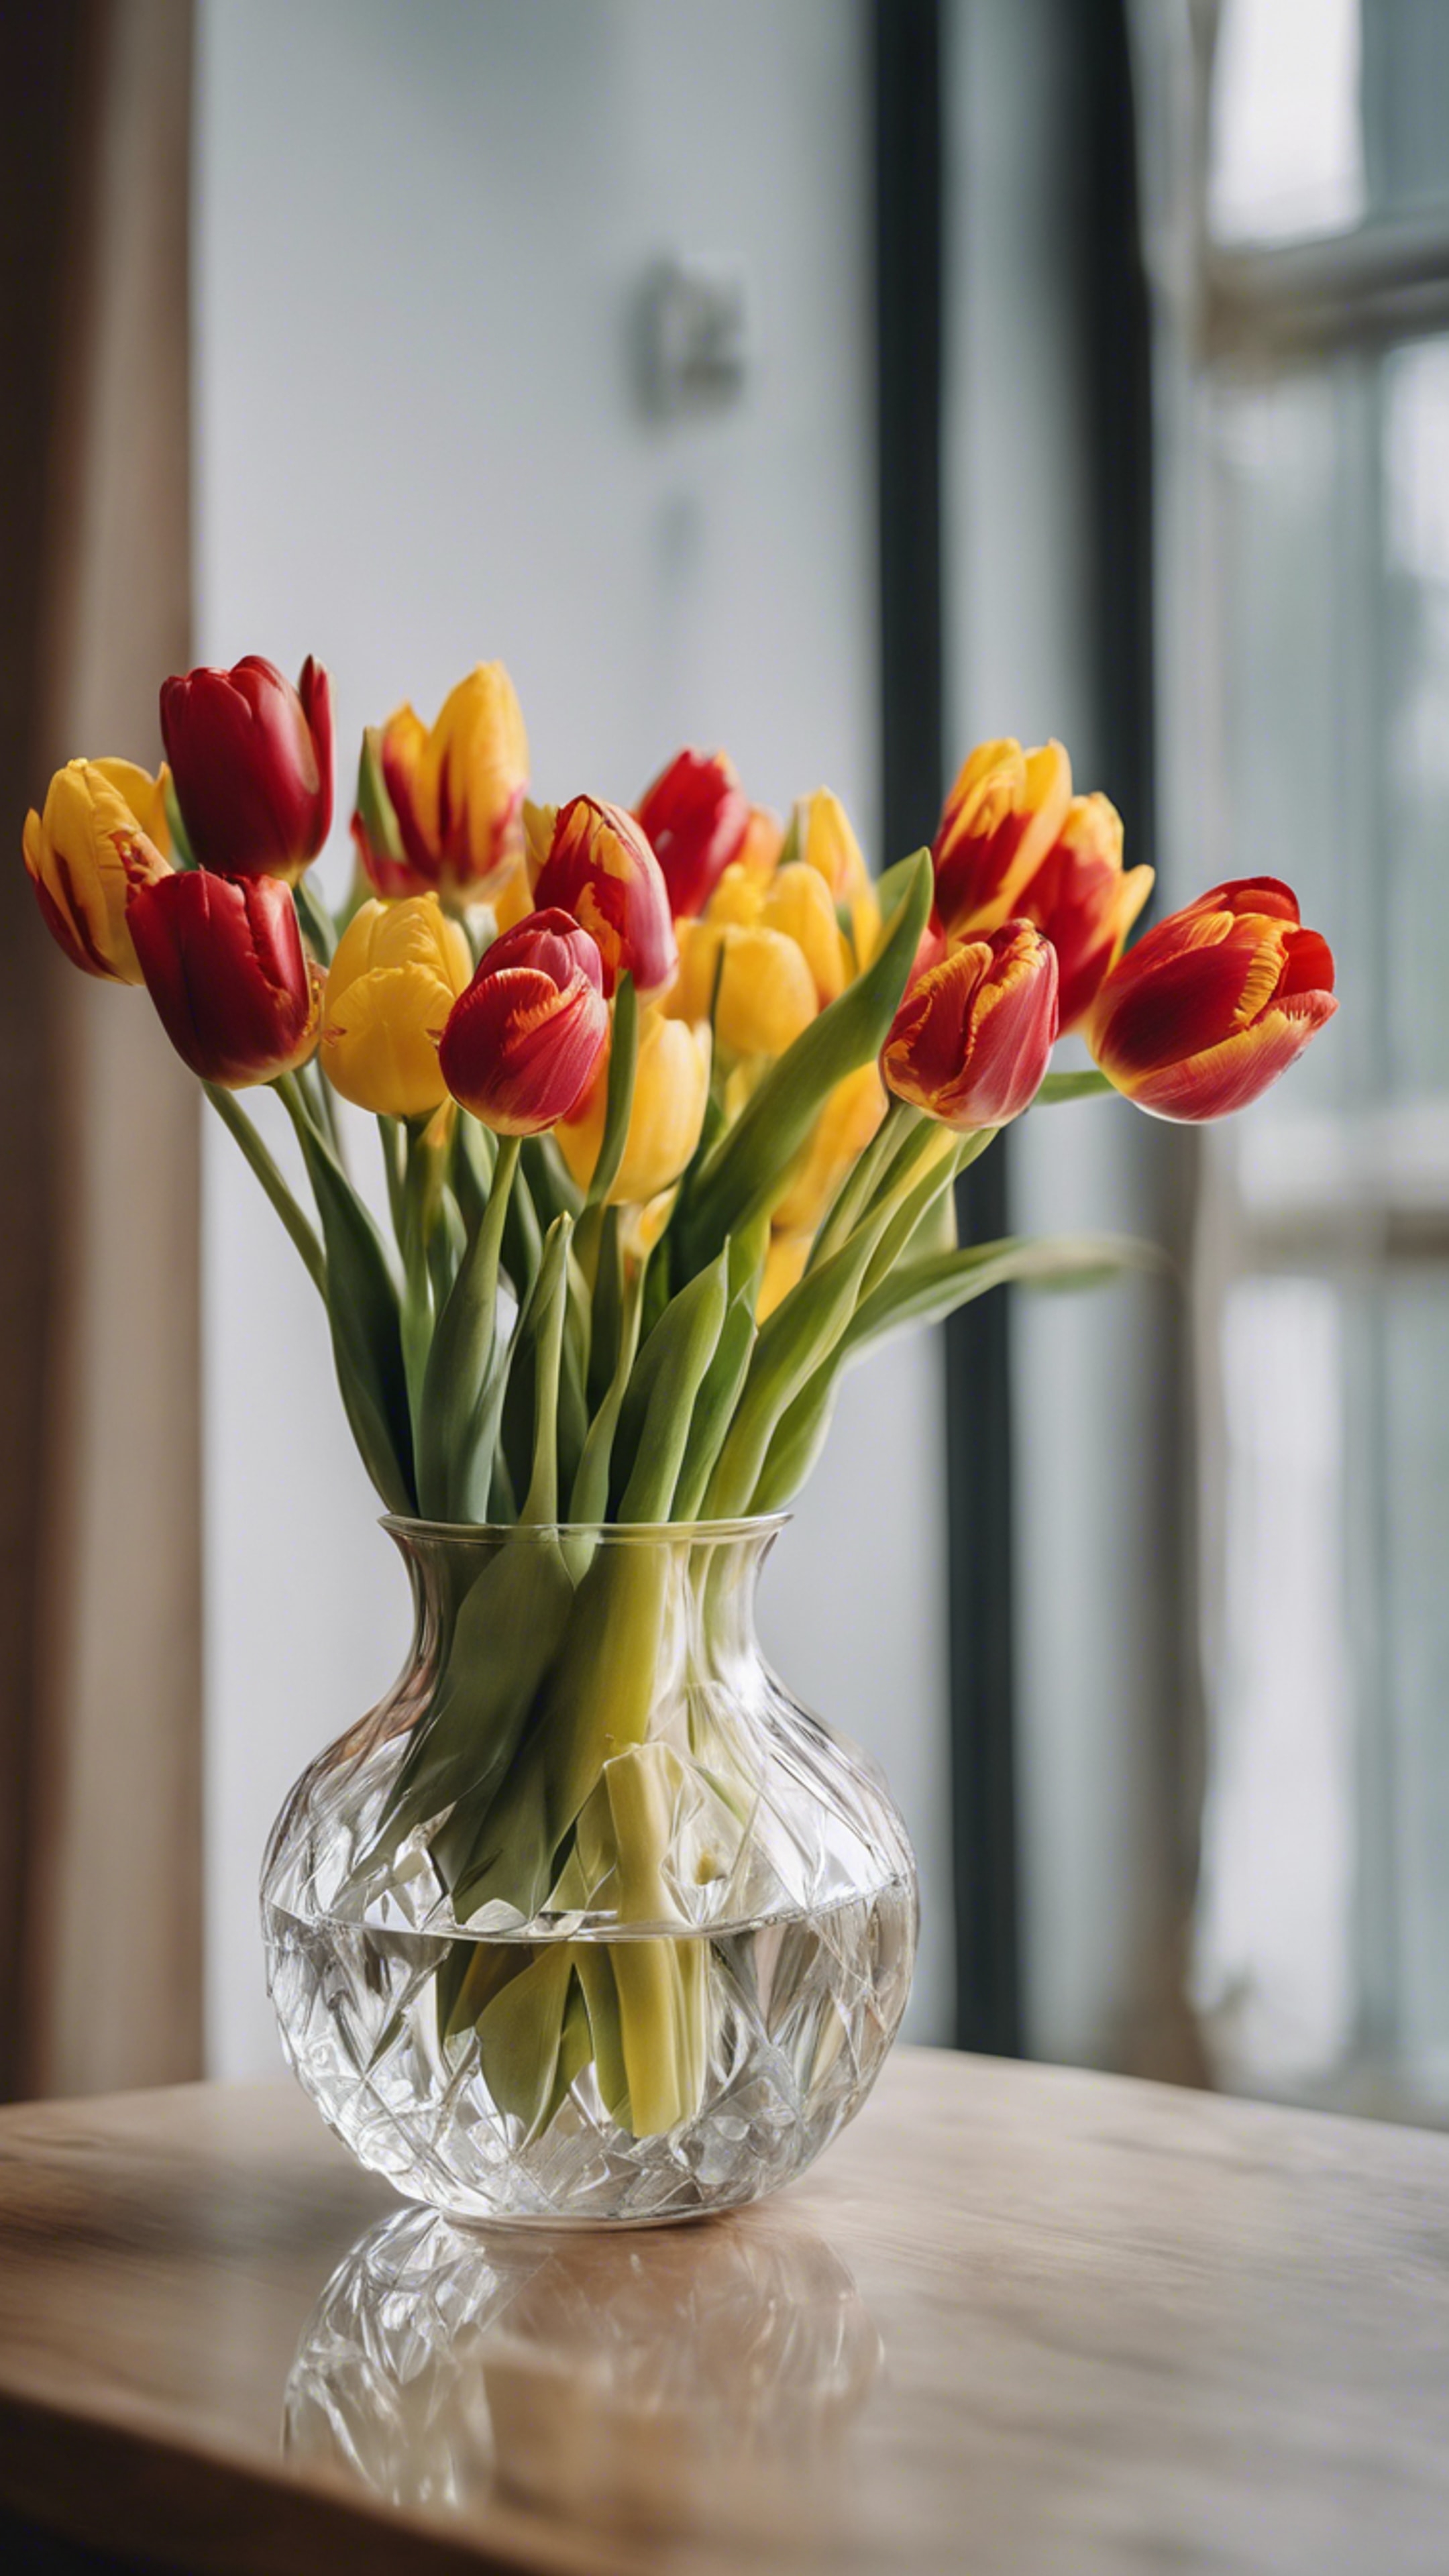 A bunch of fresh red and yellow tulips resting in a crystal clear vase. 벽지[770eab0b3cc545c1af9b]